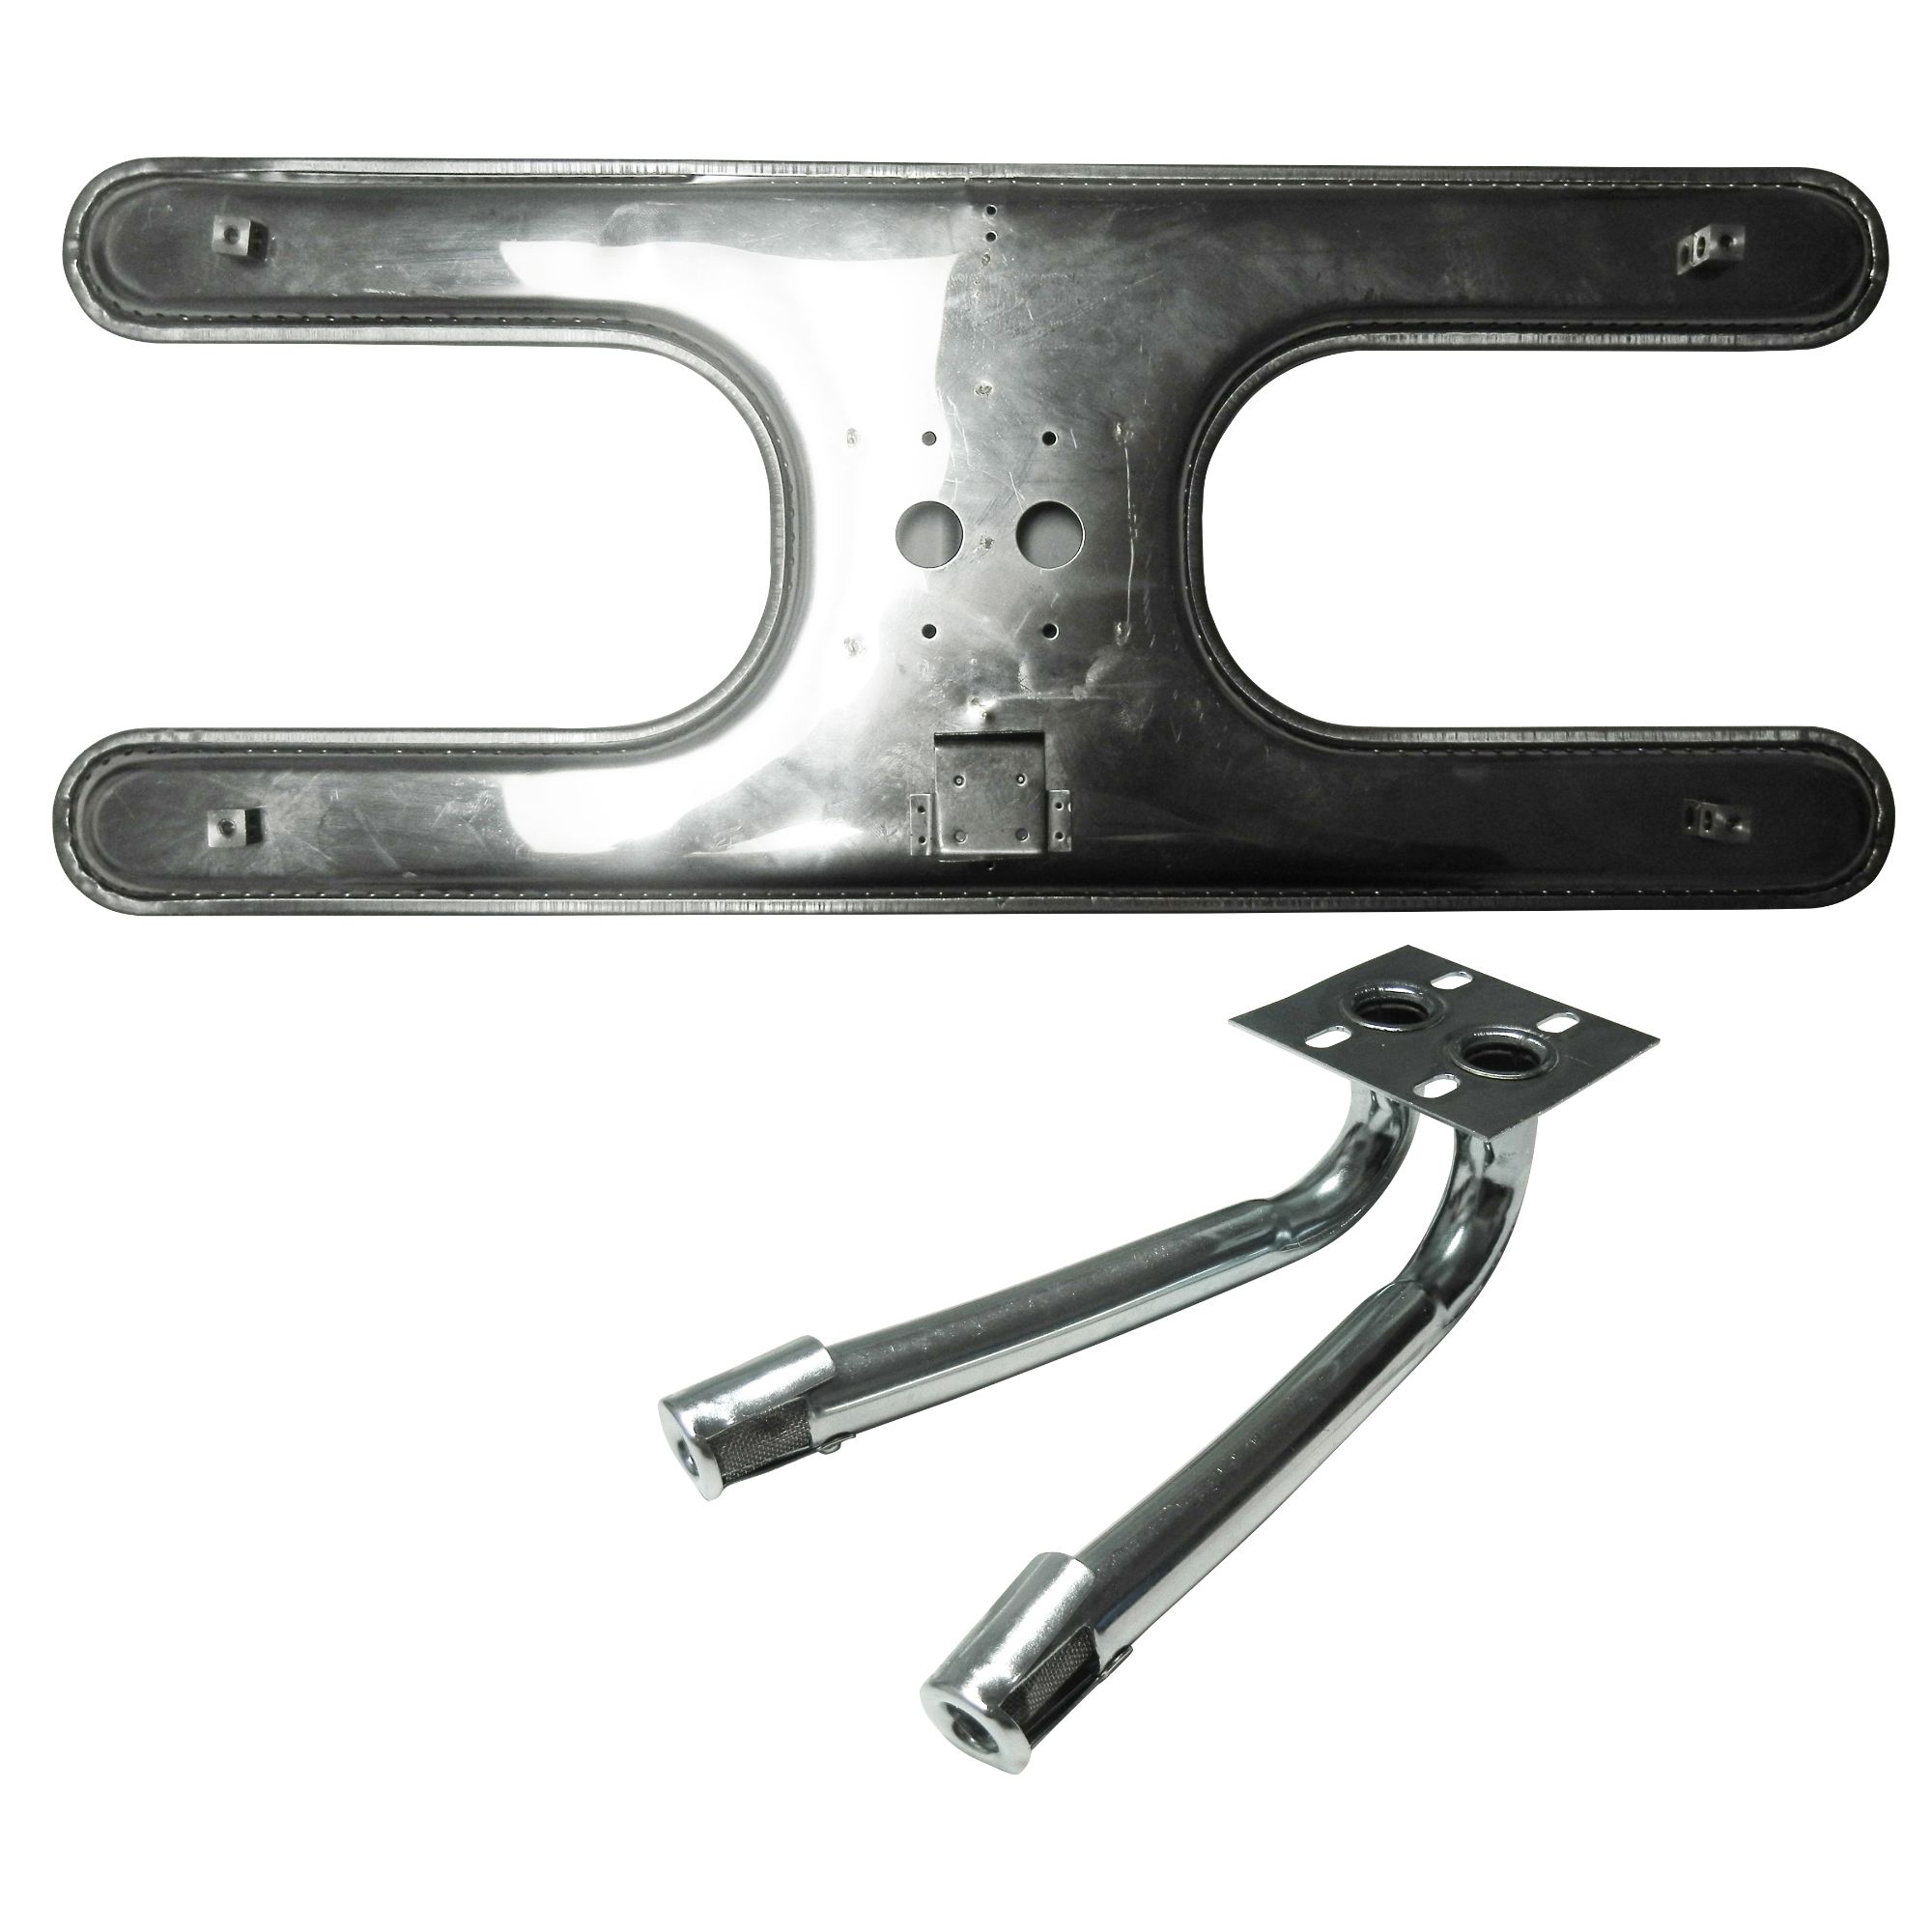 Stainless steel burner for MHP, PGS brand gas grills